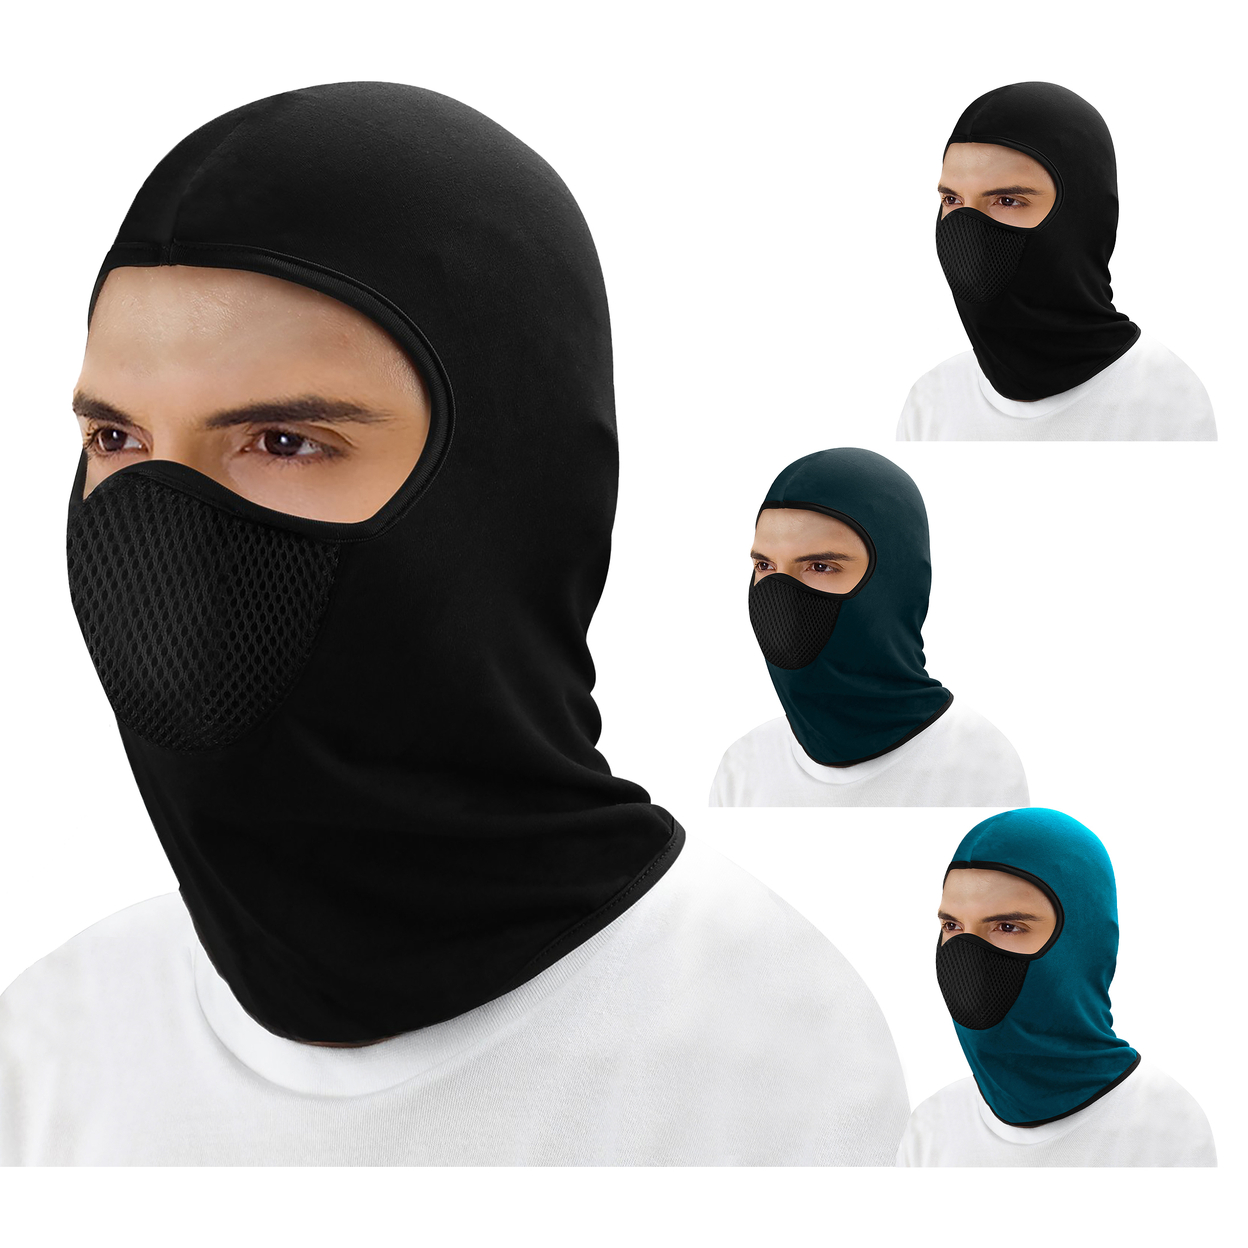 Men's Warm Winter Windproof Breathable Cozy Thermal Balaclava Winter Ski Full Face Mask - Blue